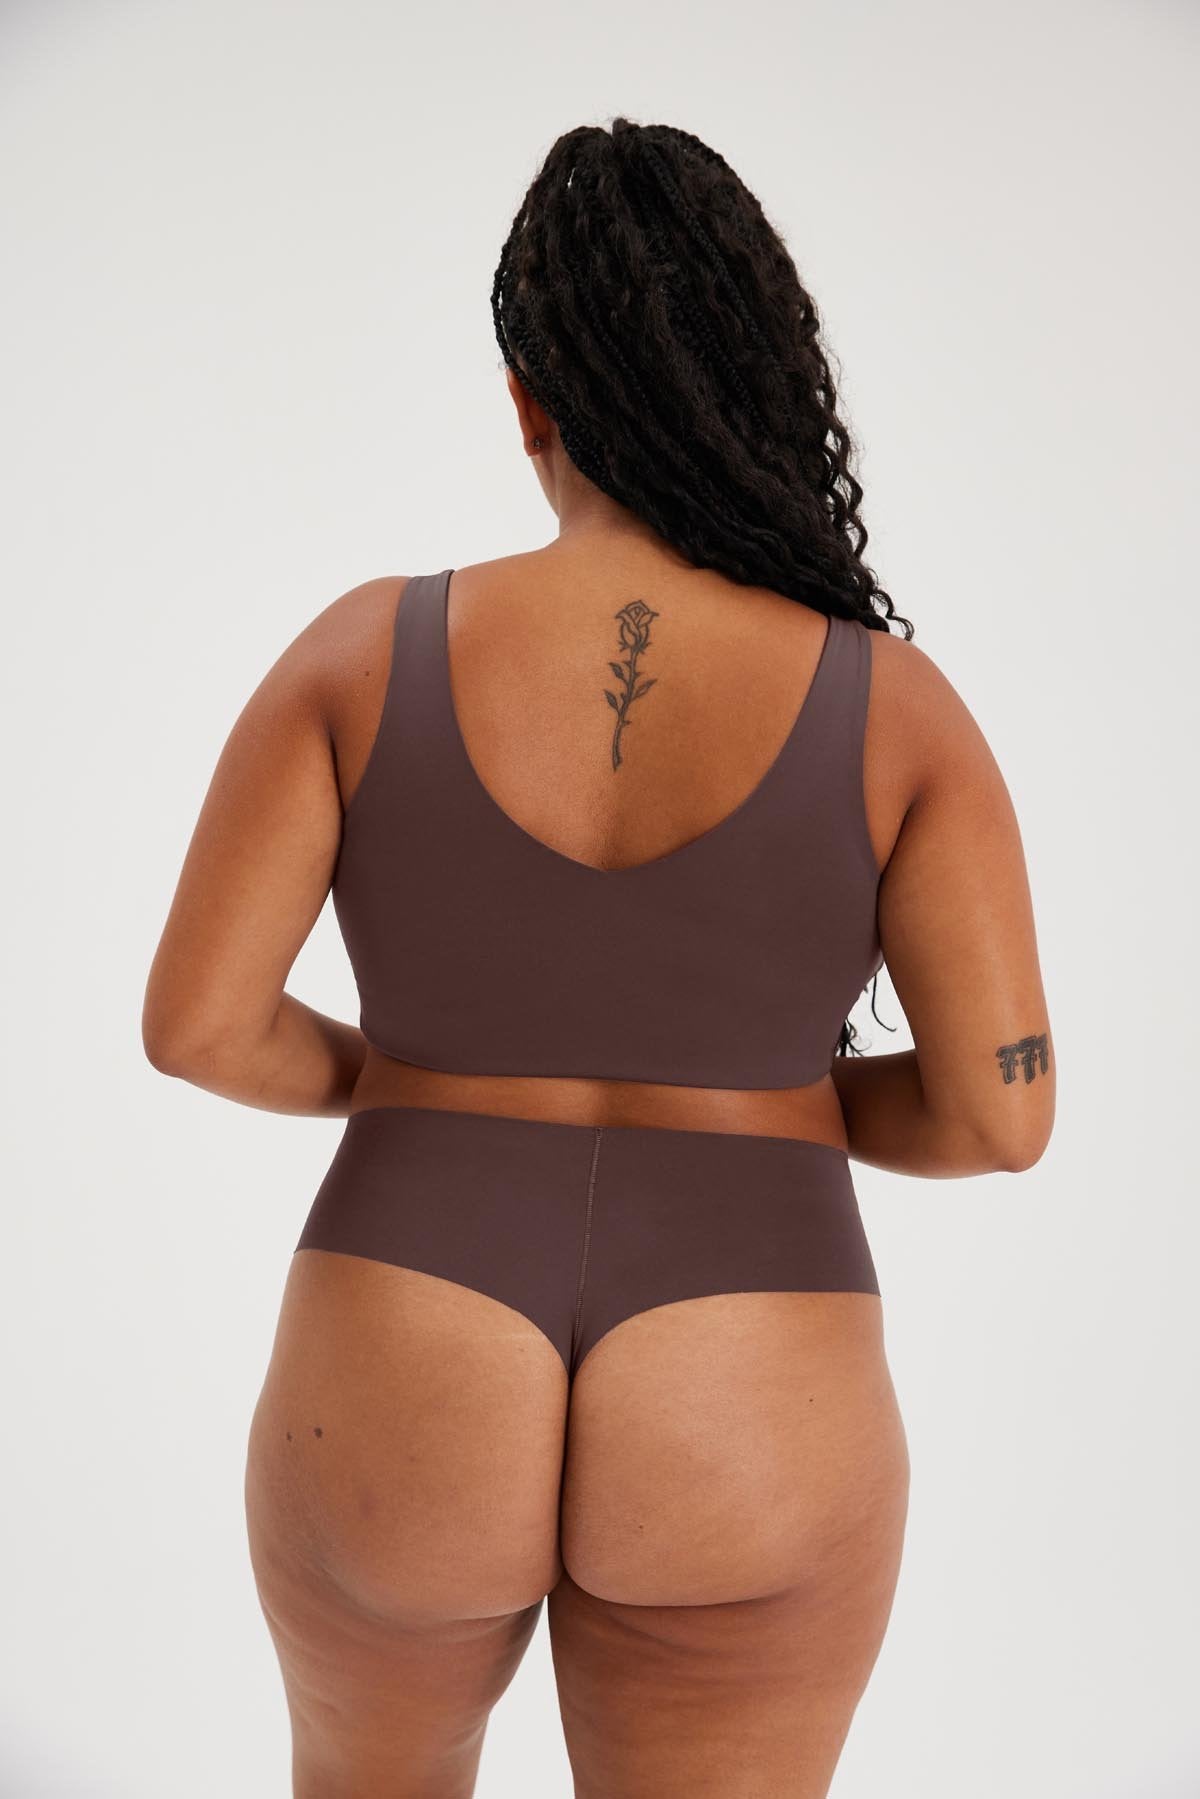 Girlfriend Collective High-Rise Thong in Espresso